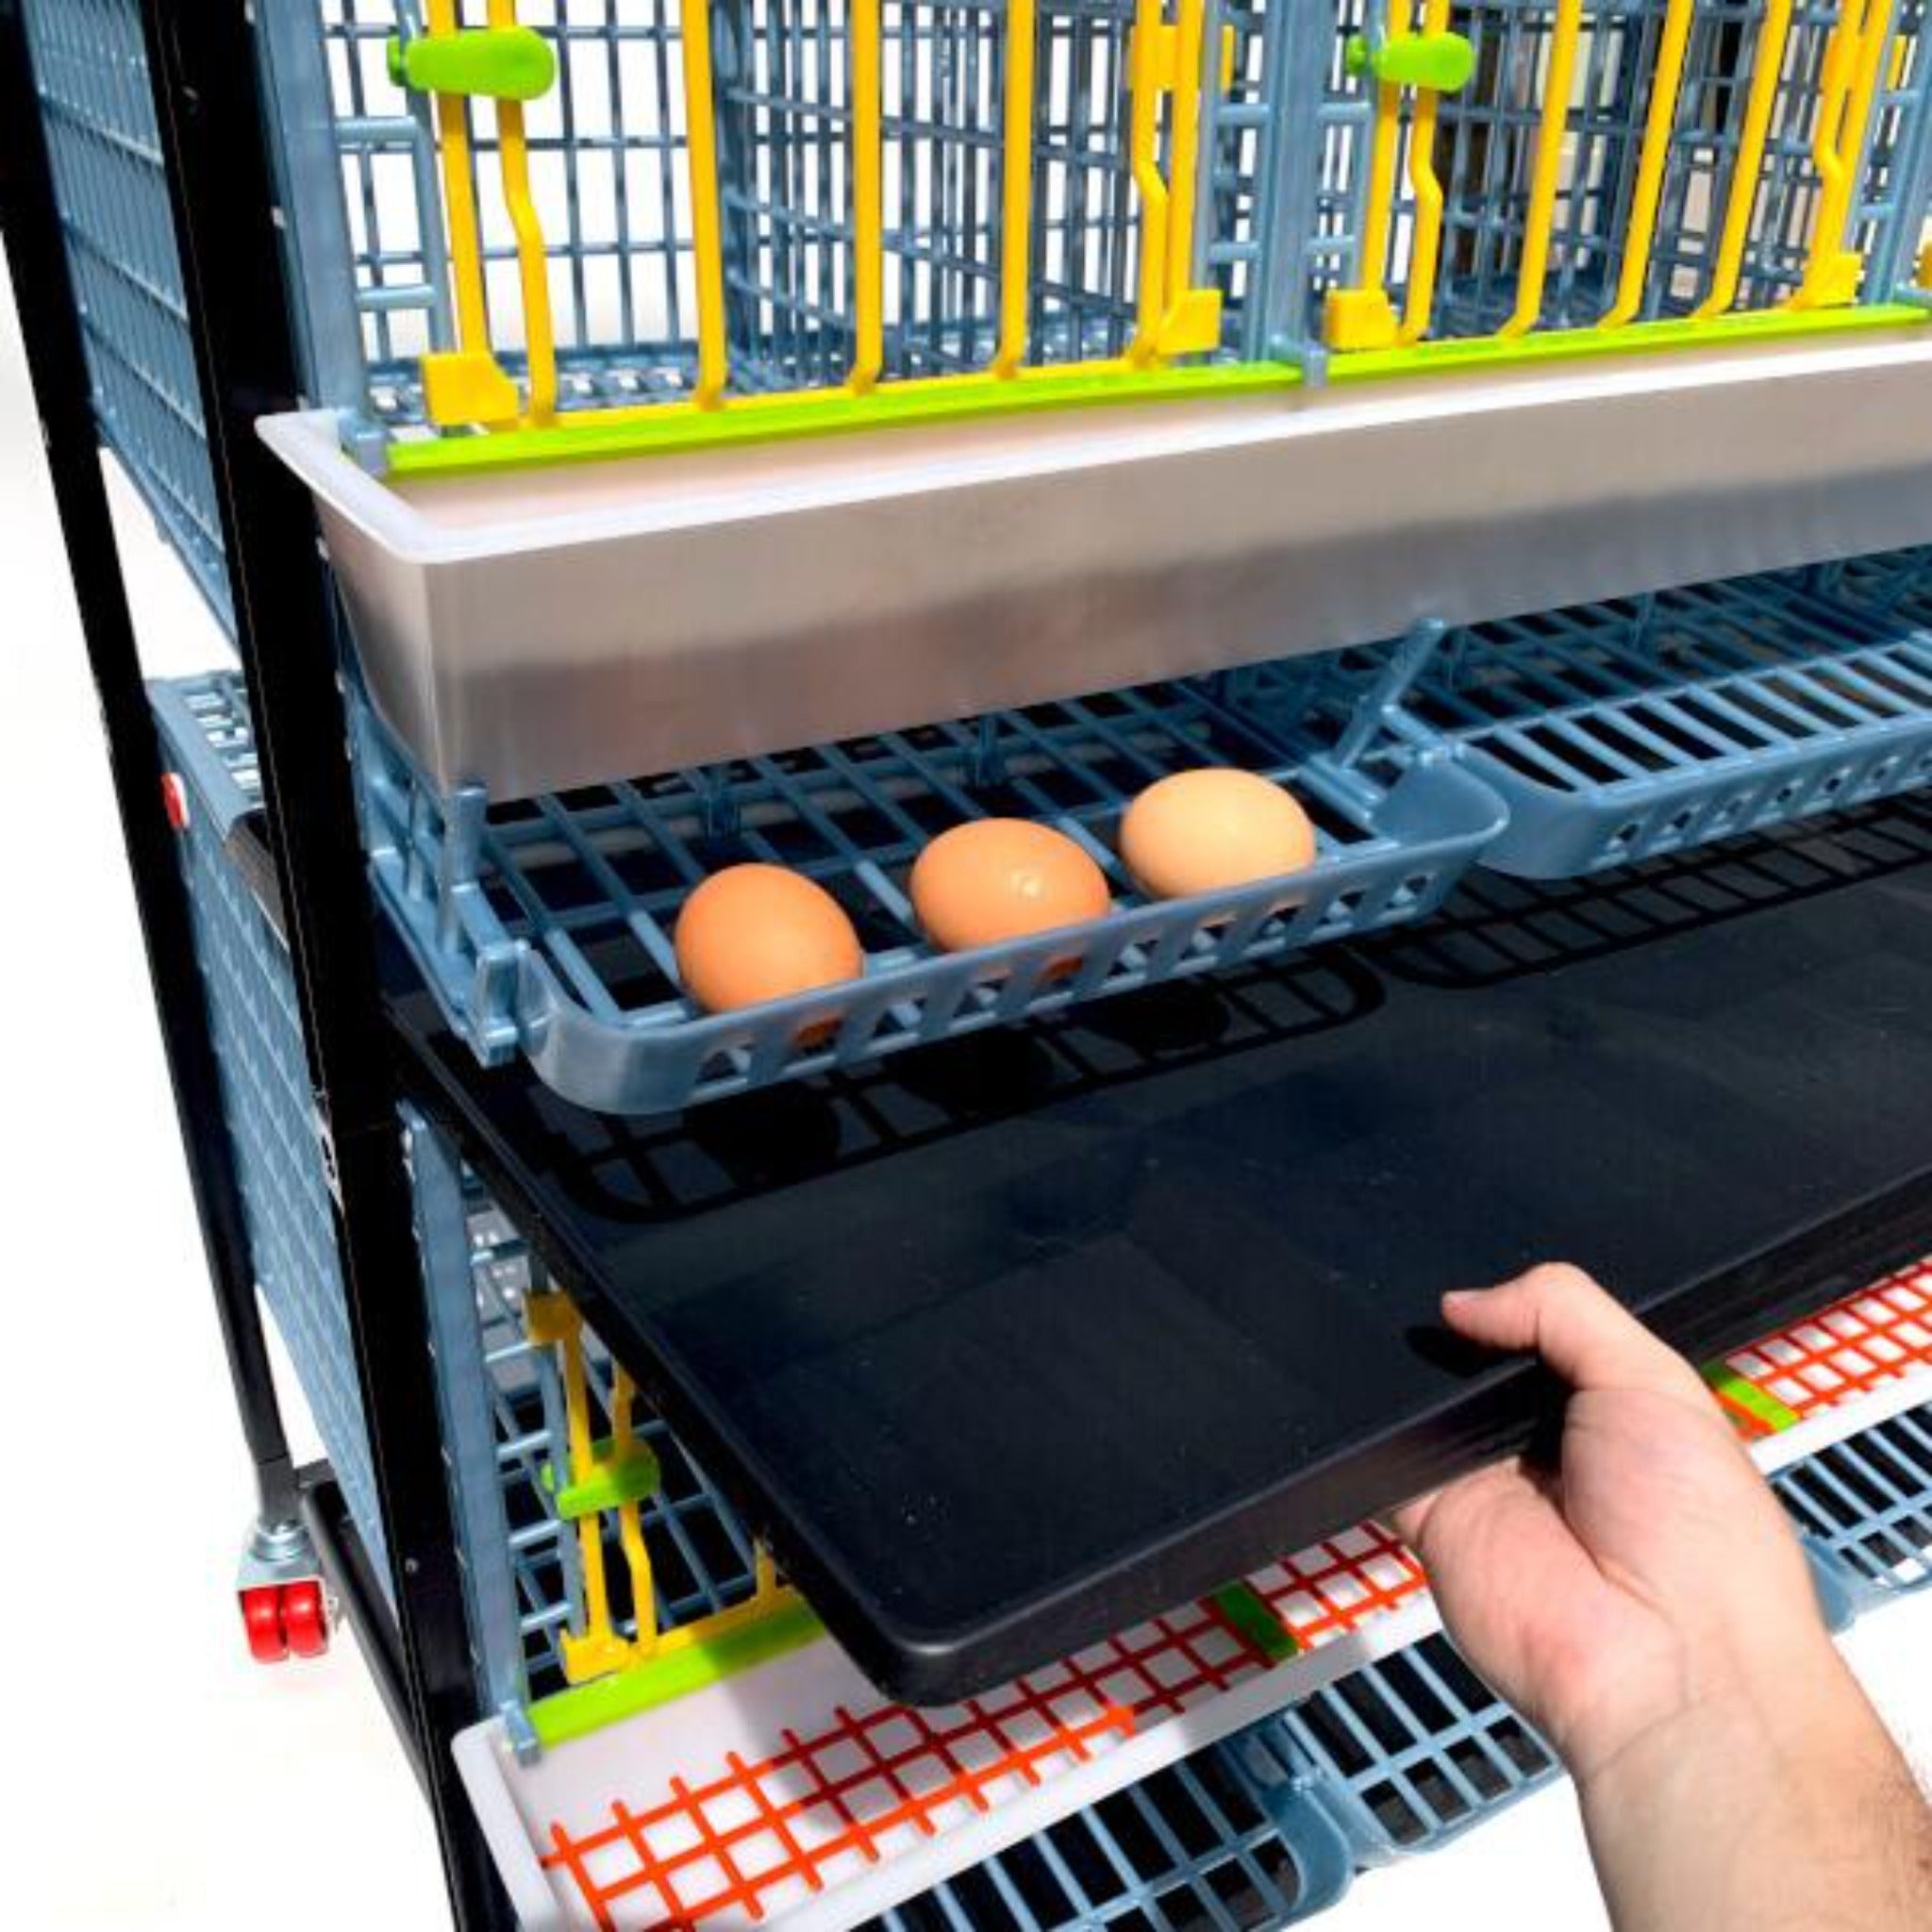 Hatching Time Cimuka. TYK40 15” Chicken cage 3 layer. Image shows chicken cage from front. Close up view shows a hand removing the manure tray. 3 eggs are in roll out egg tray for easy egg collection.